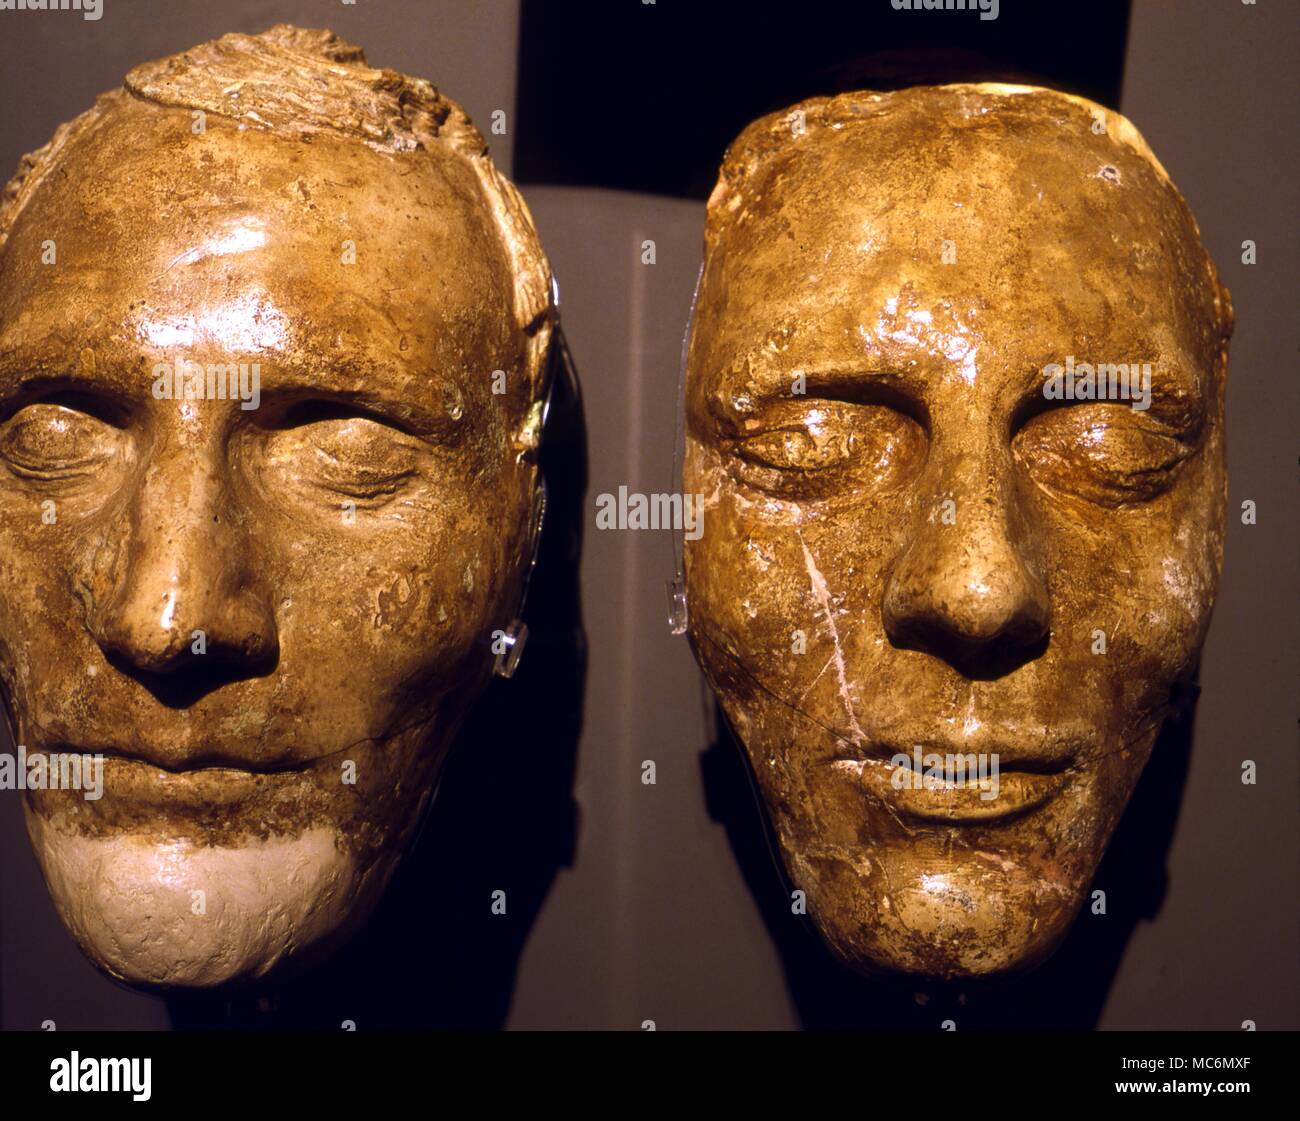 Mormons - Death Masks. Death Masks of the Mormon prophet Joseph Smith and his brother Hyam. Museum of Church History and Art. Stock Photo